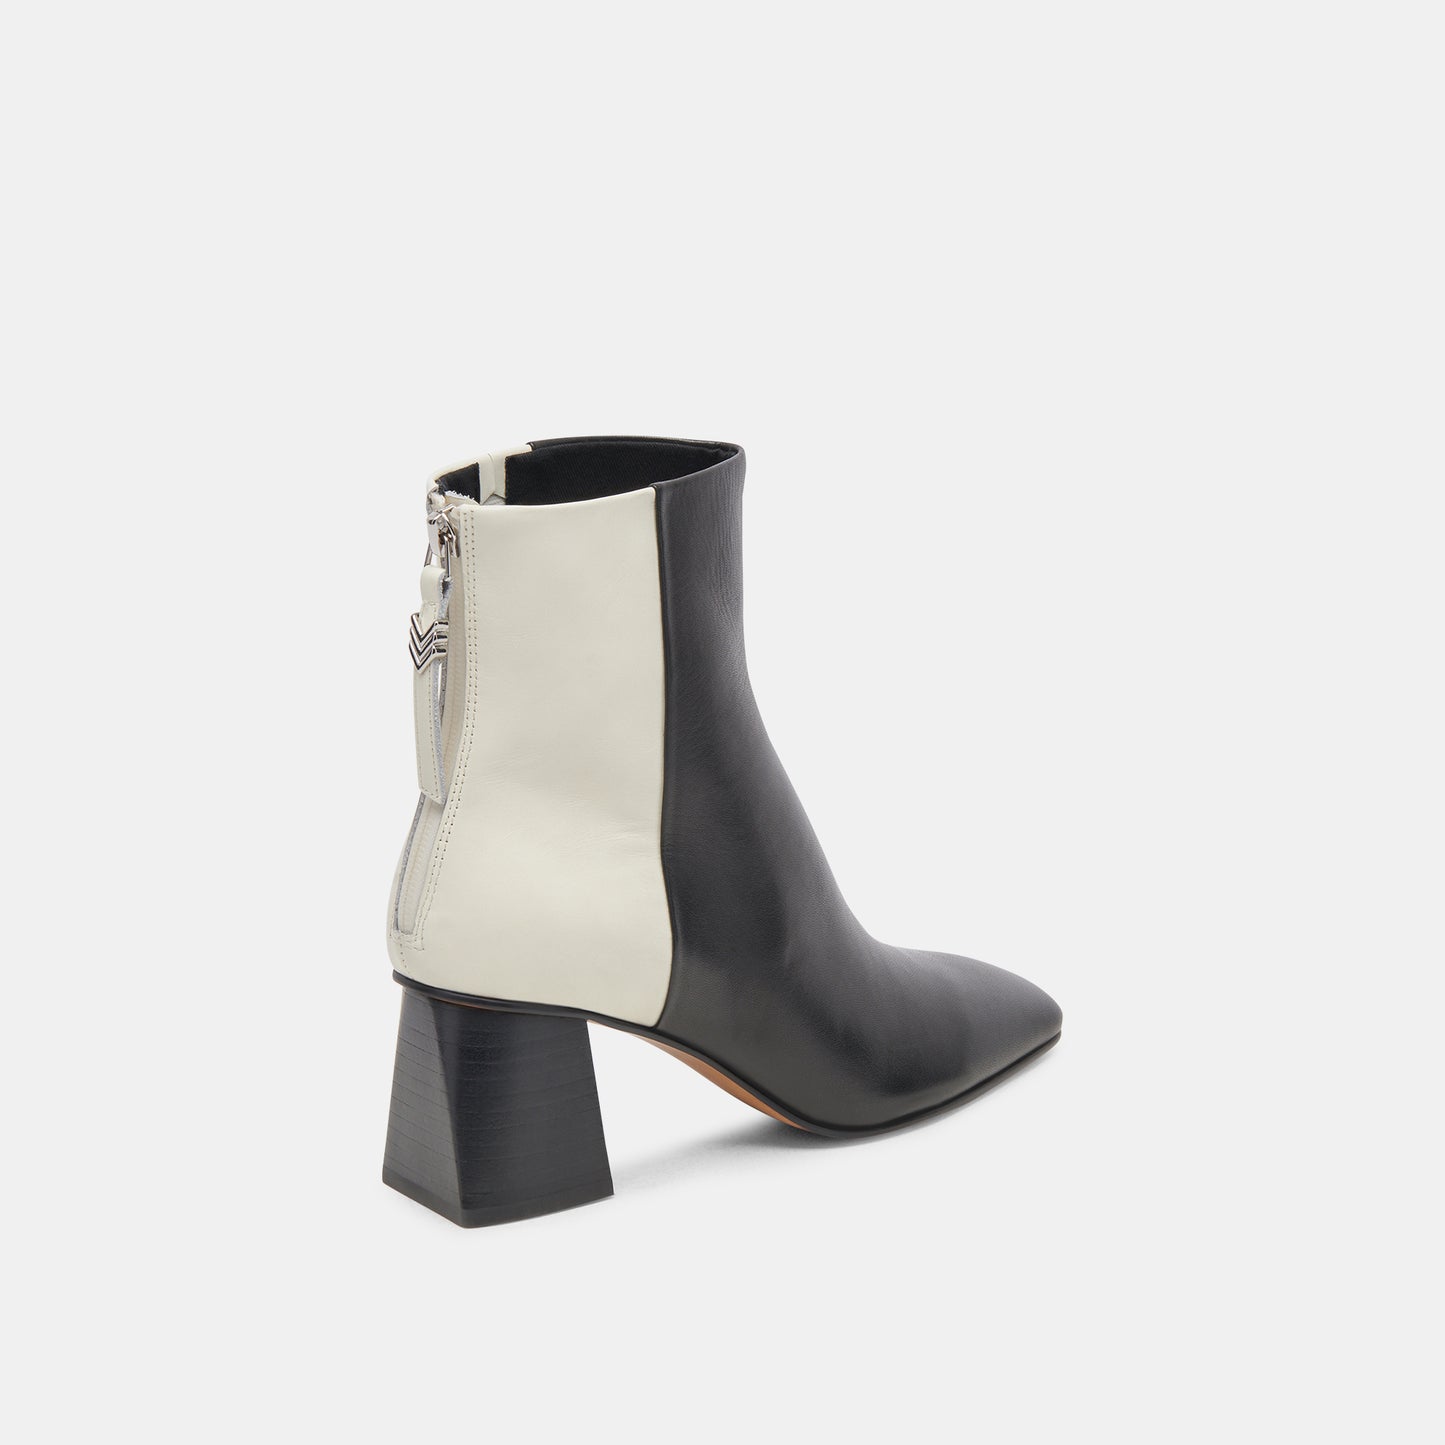 FIFI H2O WIDE BOOTIES BLACK WHITE LEATHER